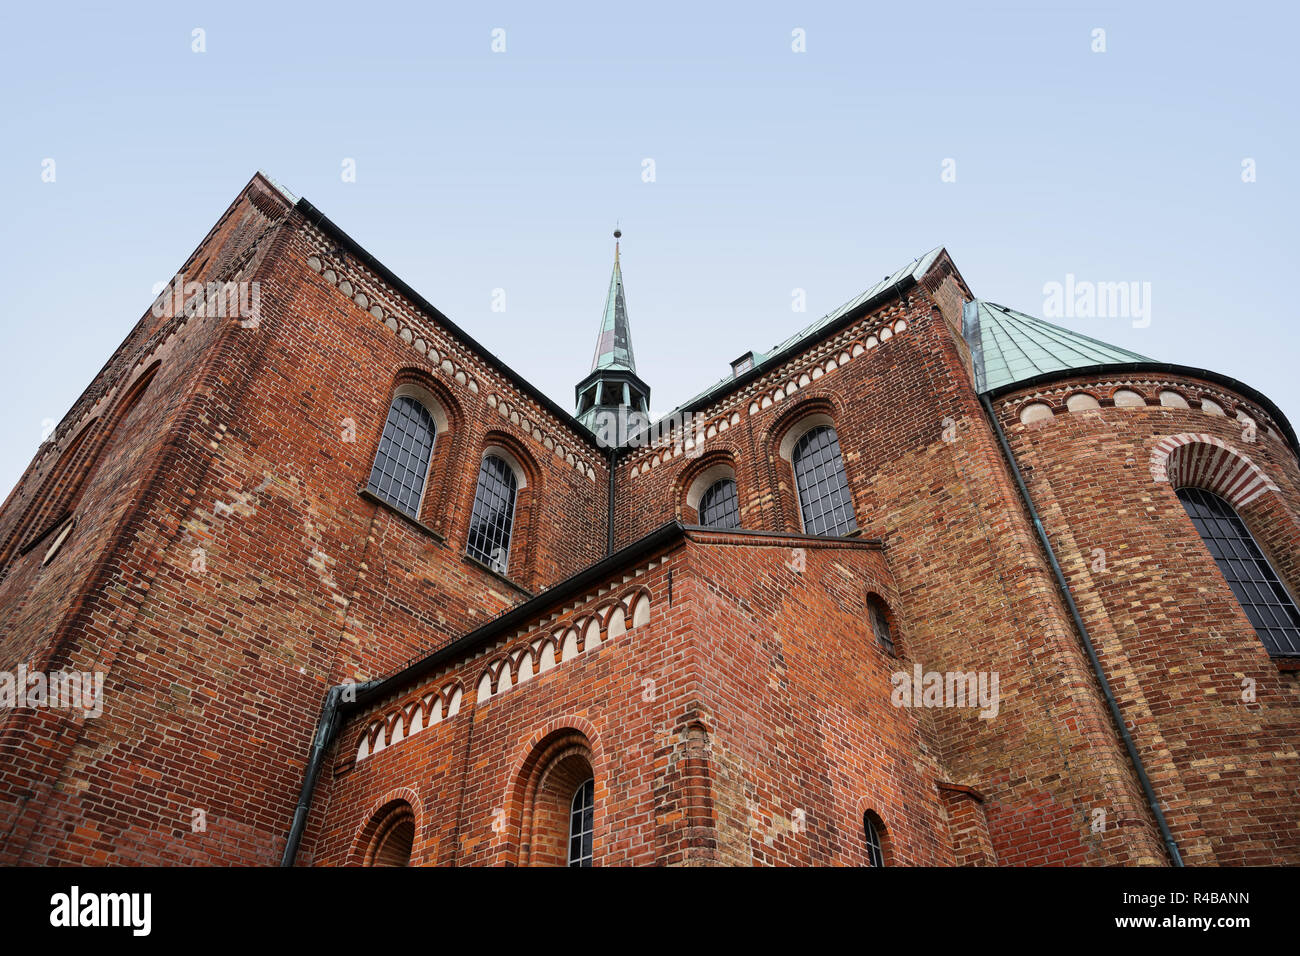 ratzeburg dom, backside of the cathedral with the ridge turret in typical brick architecture in northern germany, copy space Stock Photo